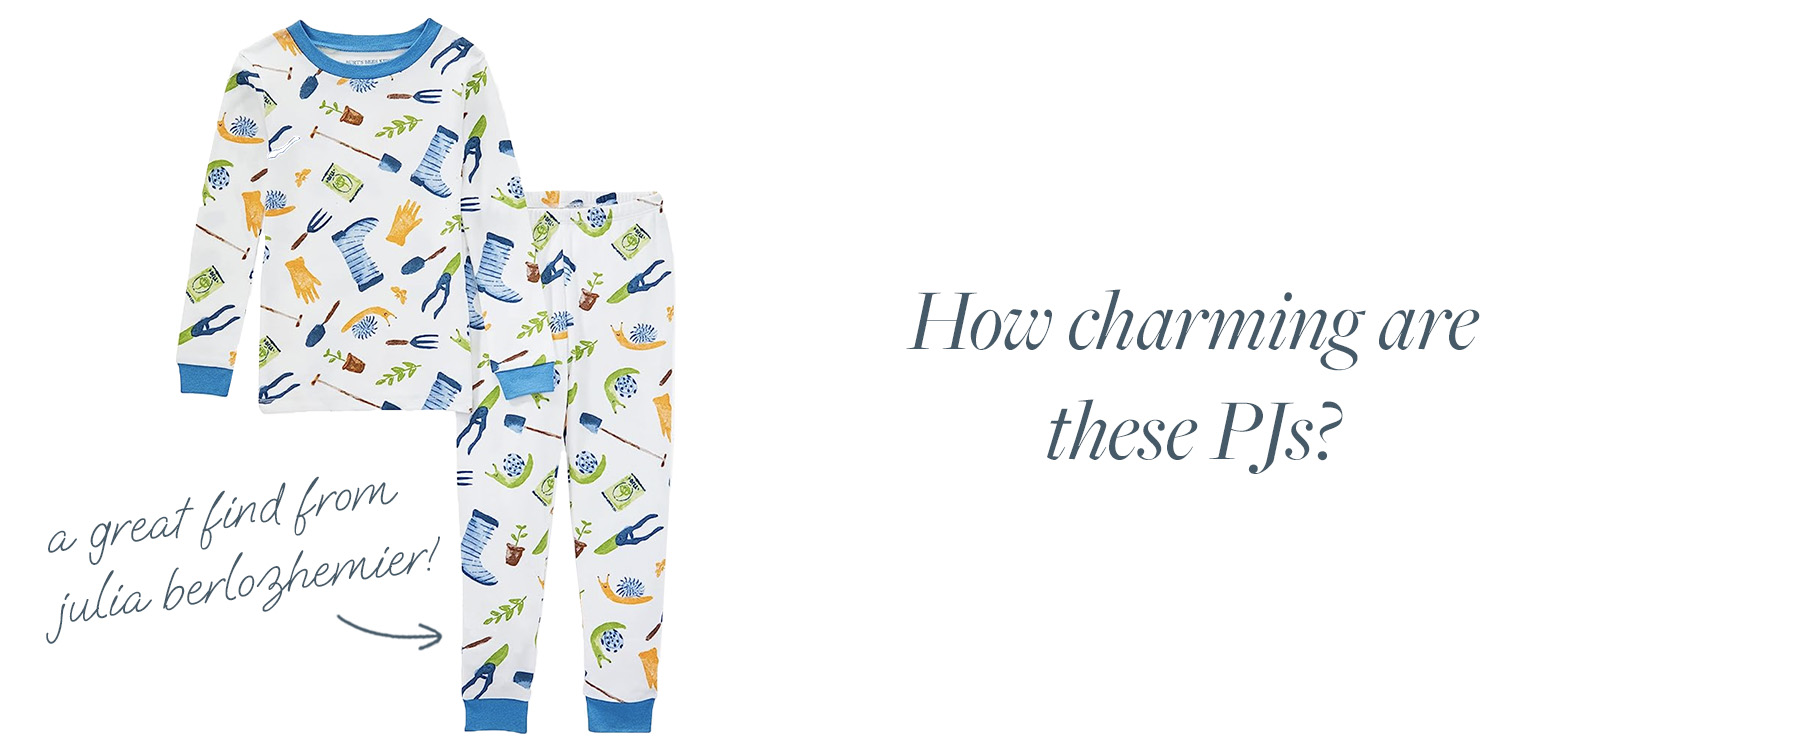 How charming are these garden-themed PJs? A great find from Julia Berlozhemier!